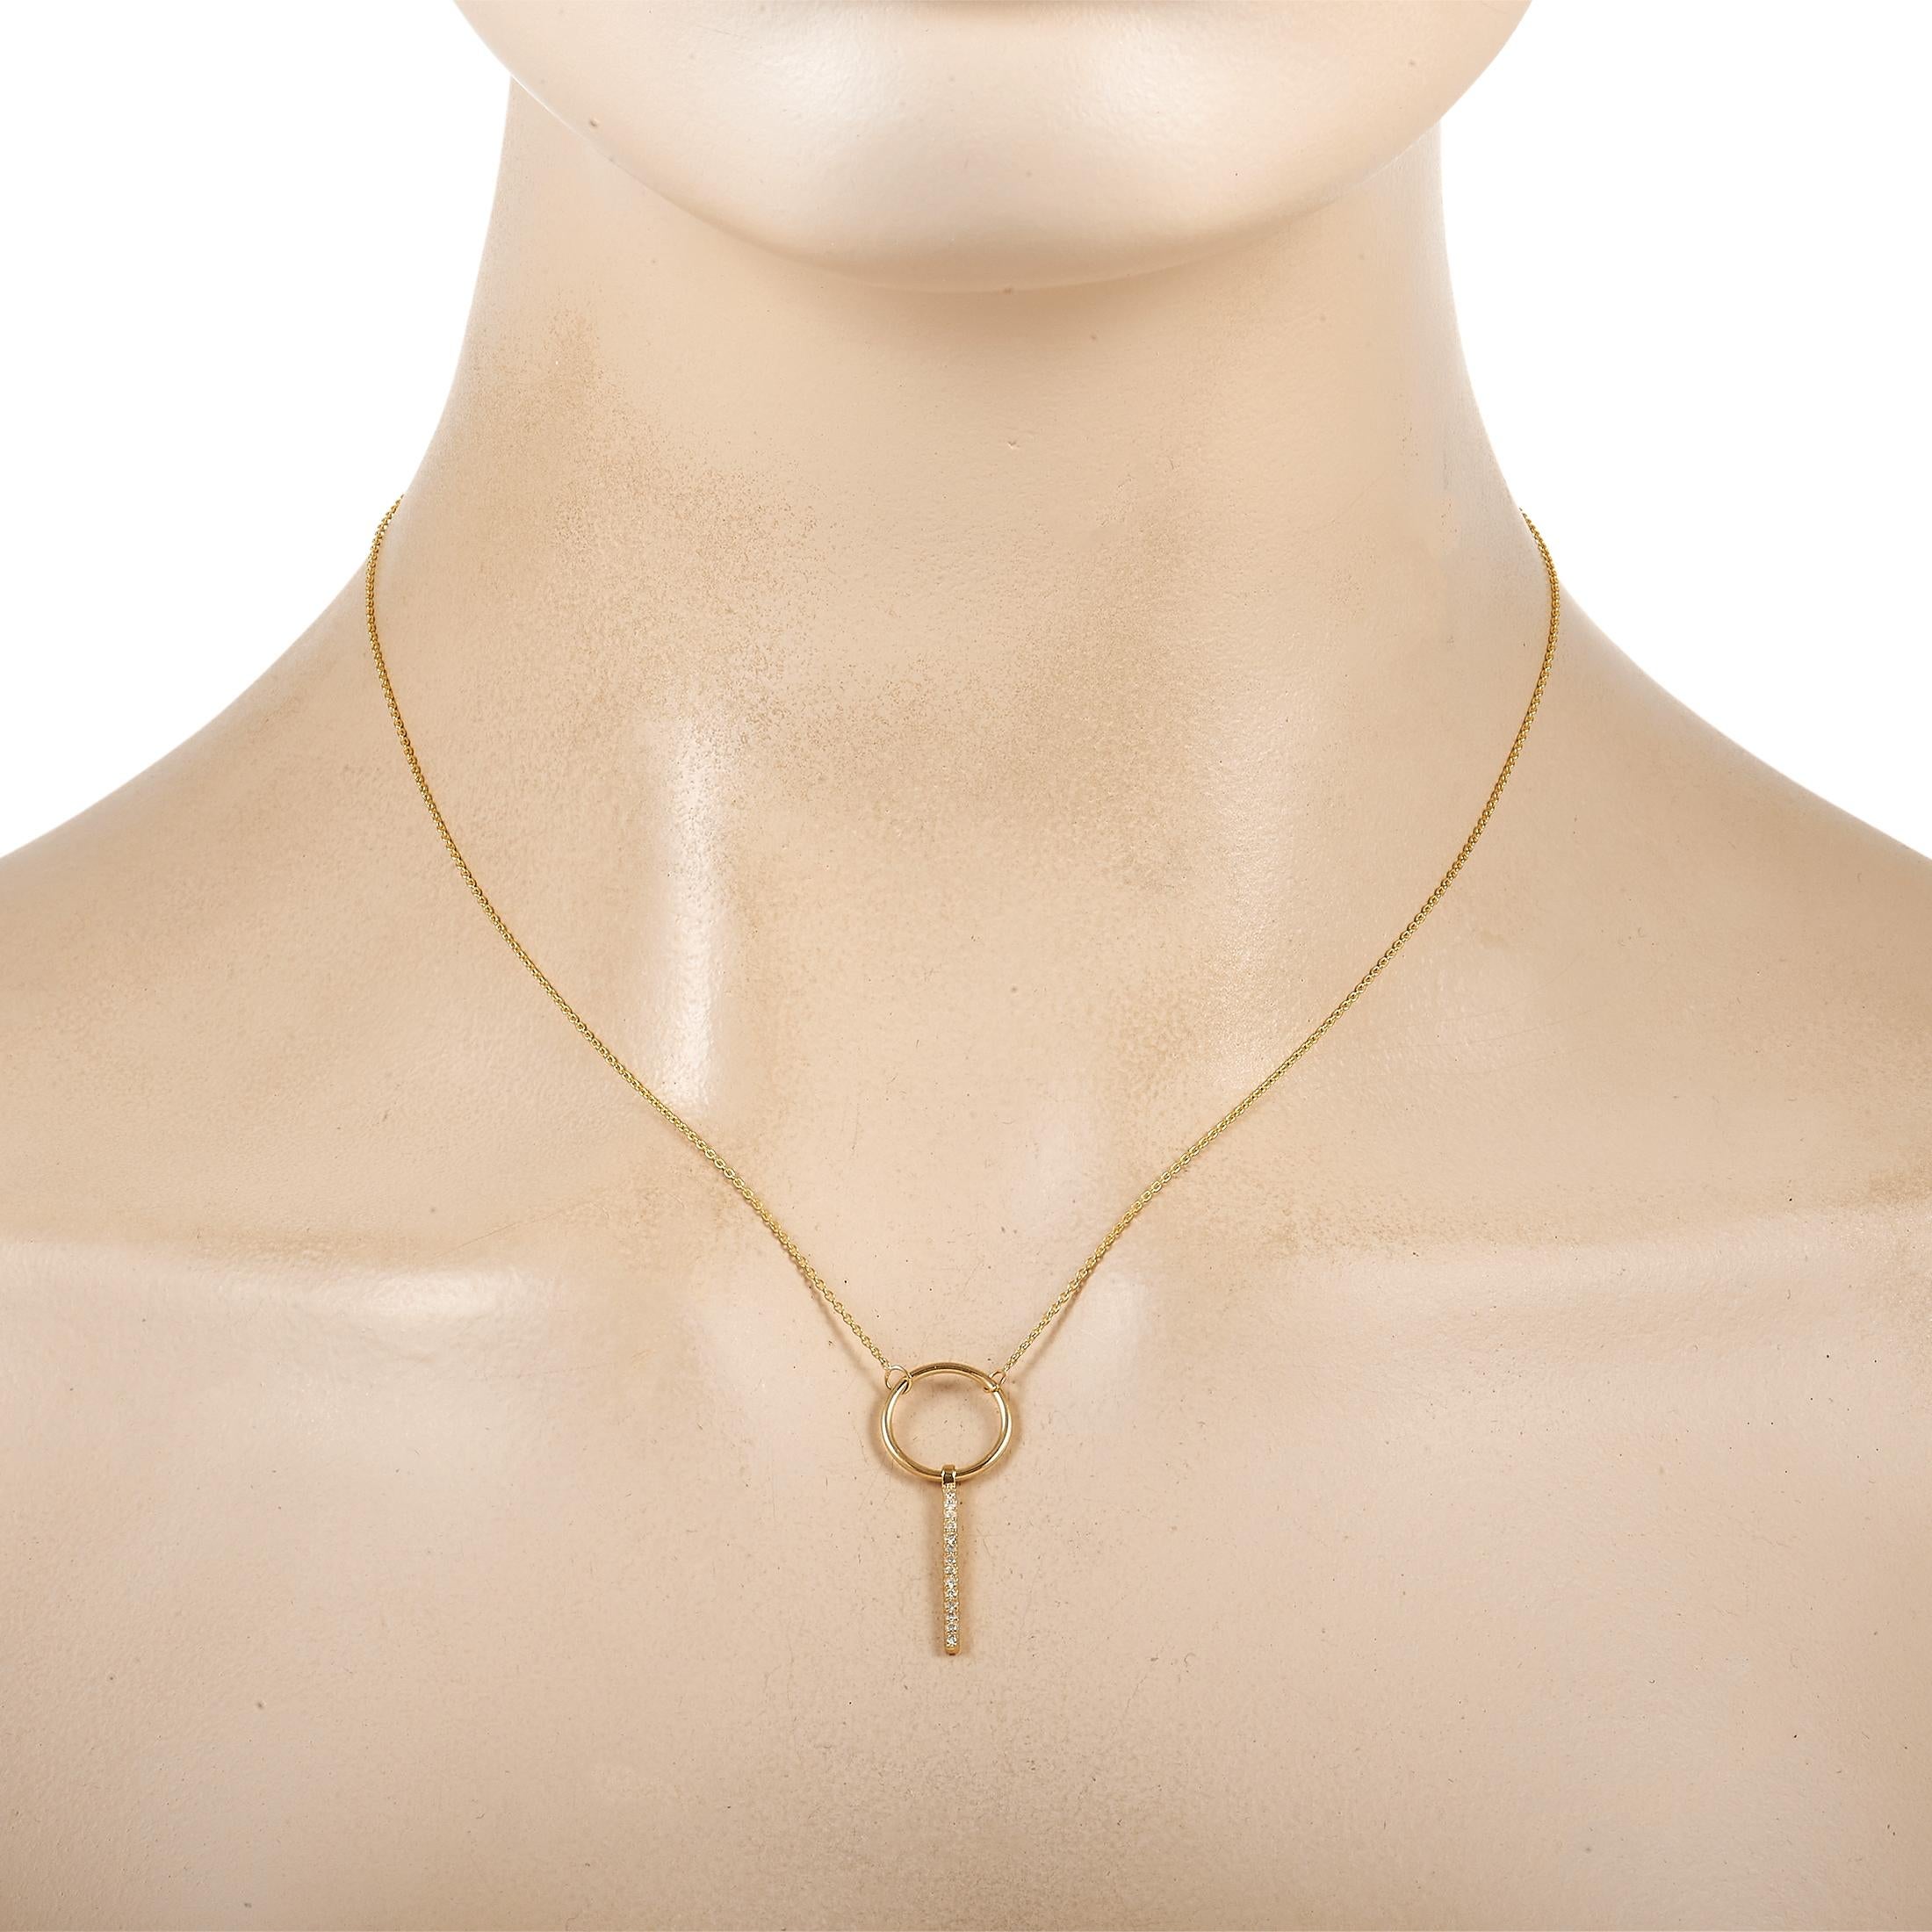 A dramatic design makes this luxury necklace a truly special addition to any jewelry collection. Crafted from 14K yellow gold, this piece features a bold pendant measuring 1.25” long and 0.5” wide suspended from a 16.5” chain. A series of diamonds